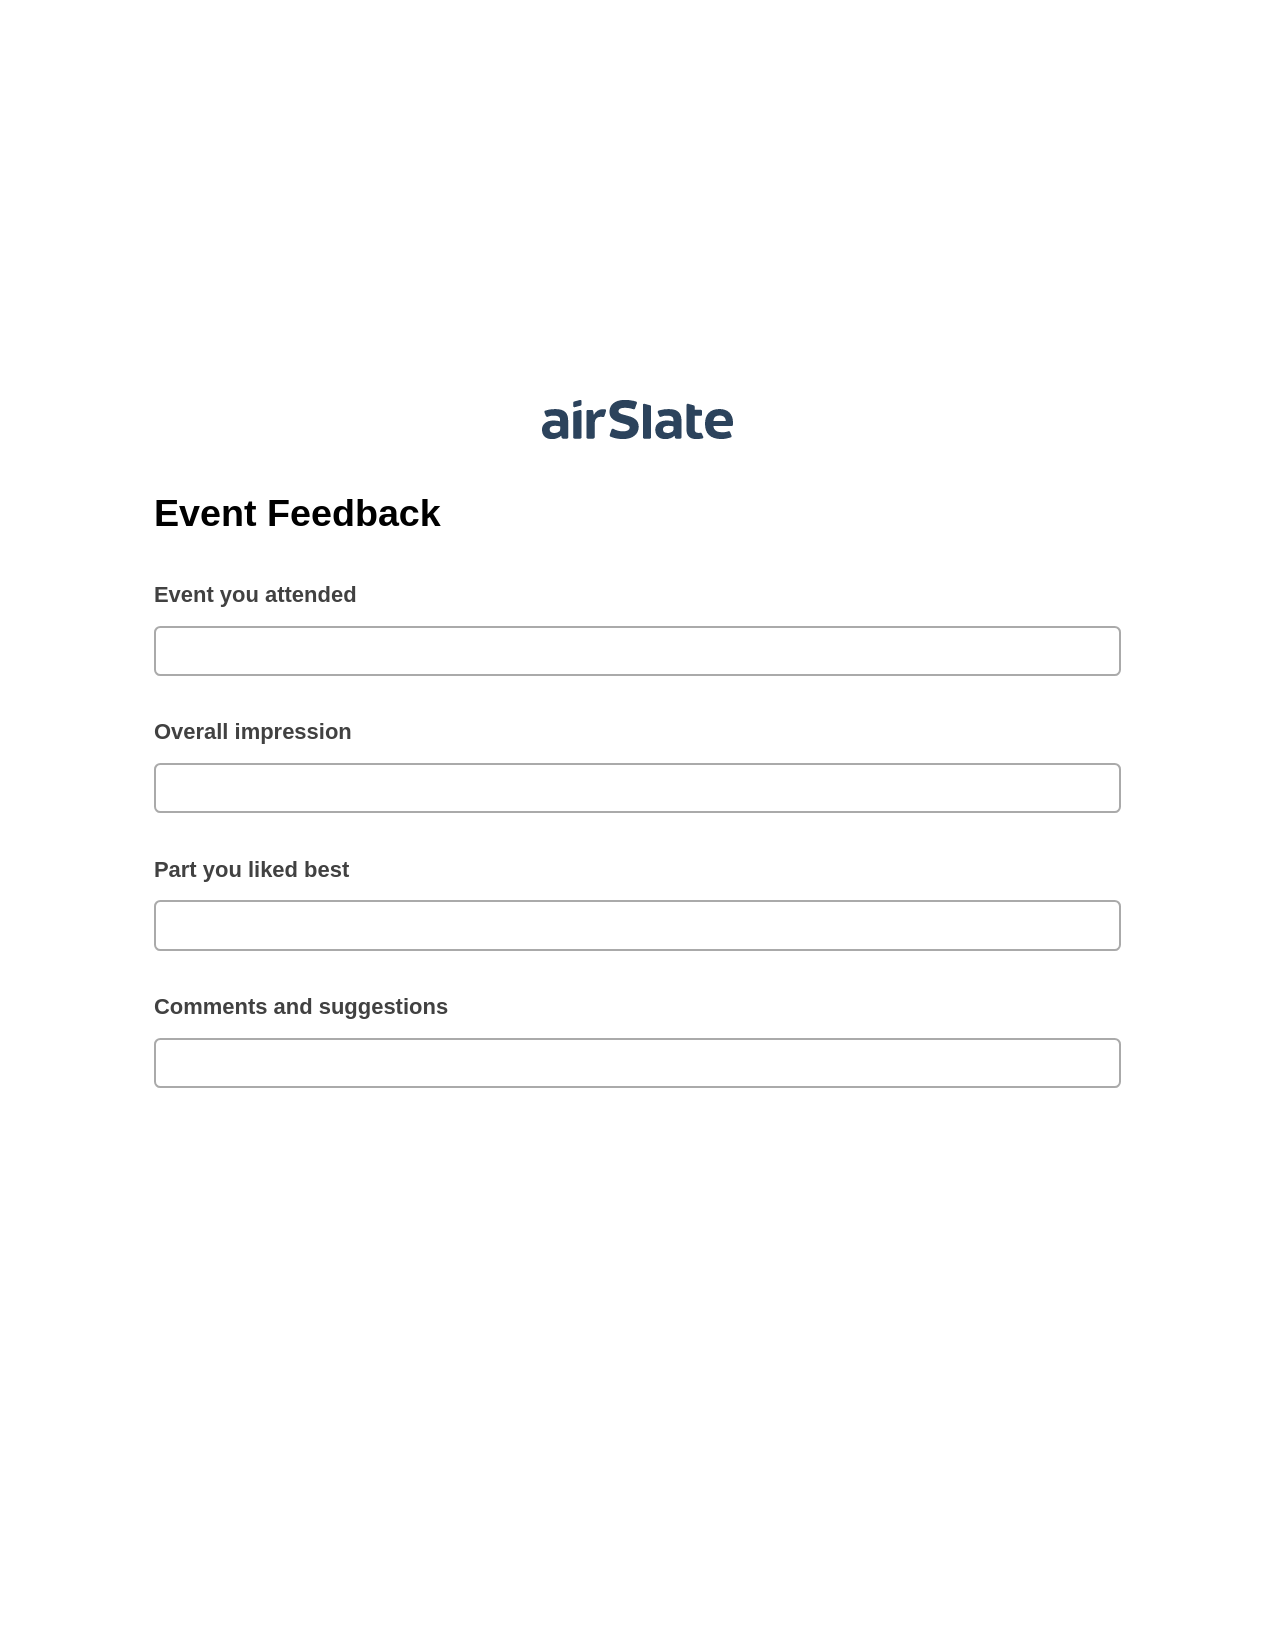 Event Feedback Pre-fill from another Slate Bot, Reminder Bot, Export to Excel 365 Bot